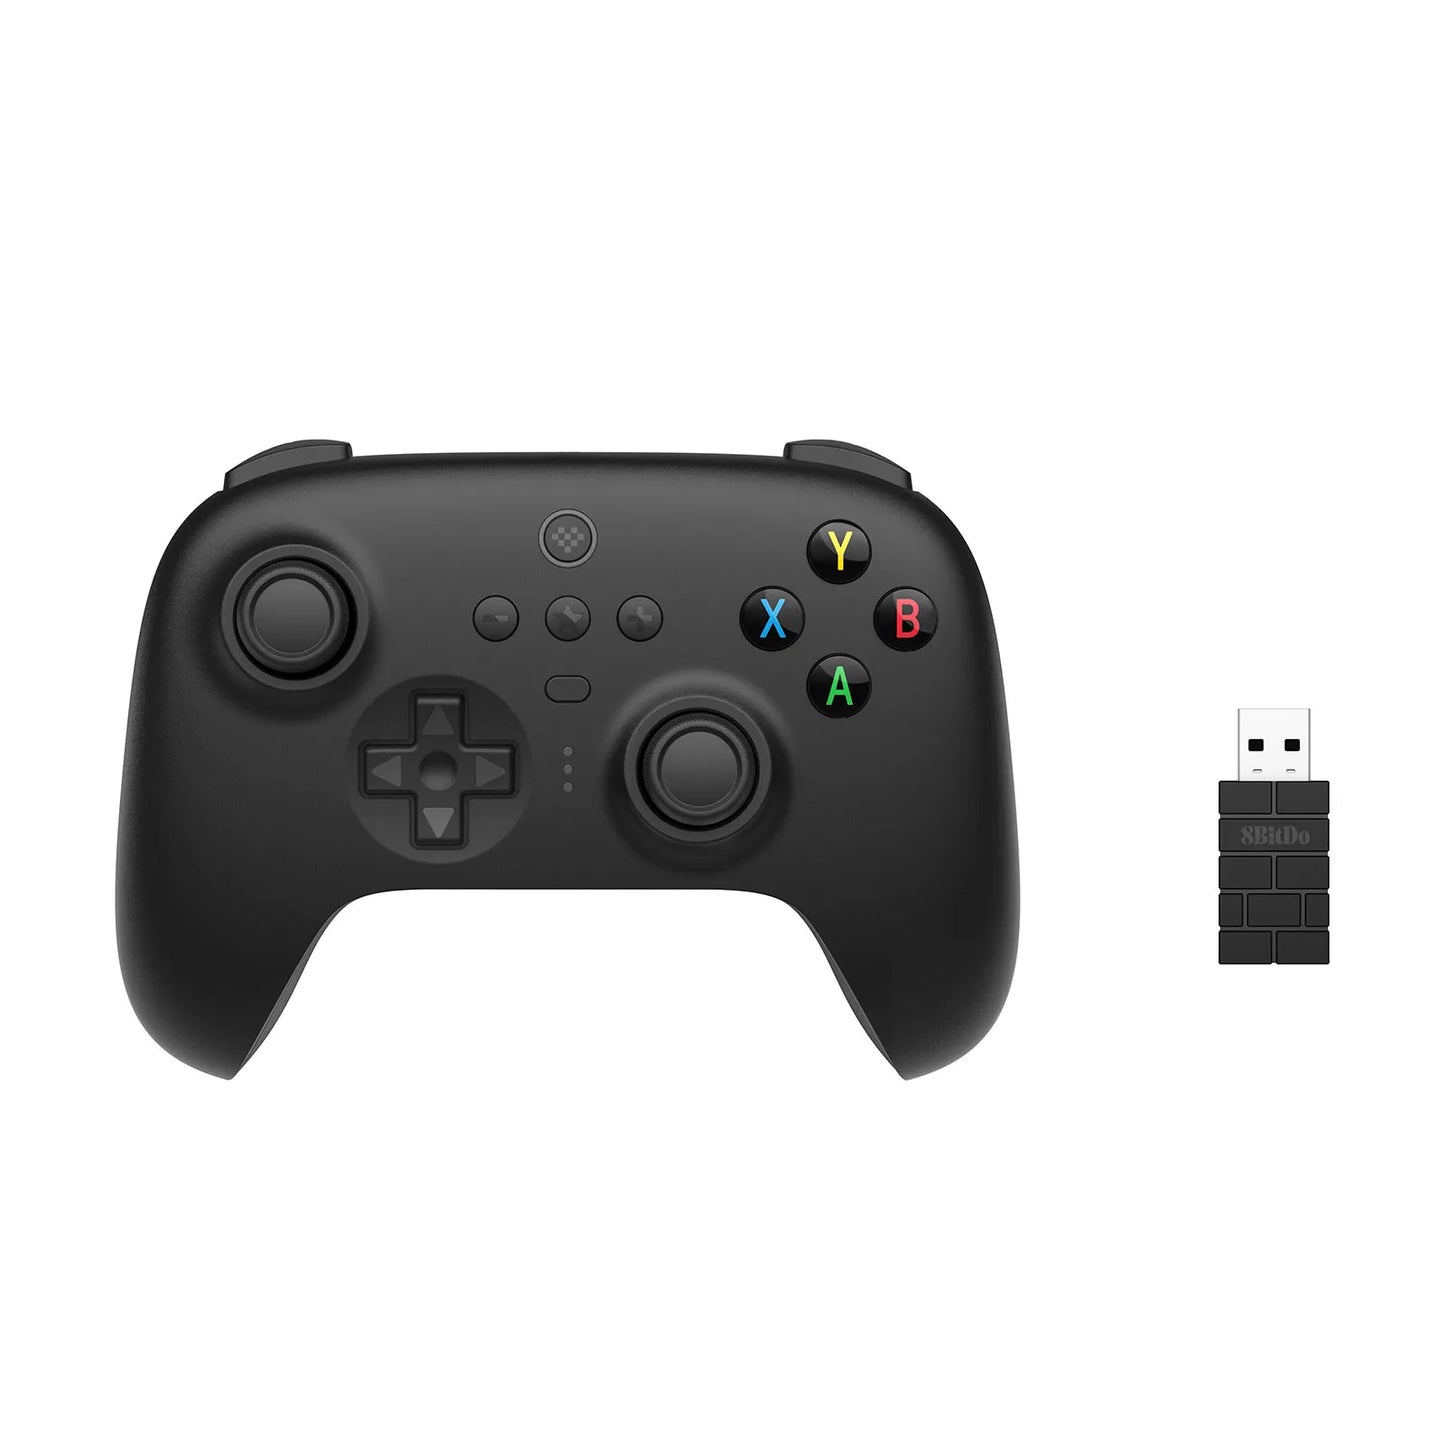 8BitDo - Ultimate Wireless 2.4G Gaming Controller with Charging Dock for PC, Windows 10, 11, Steam Deck, Android & iPhone, iPad